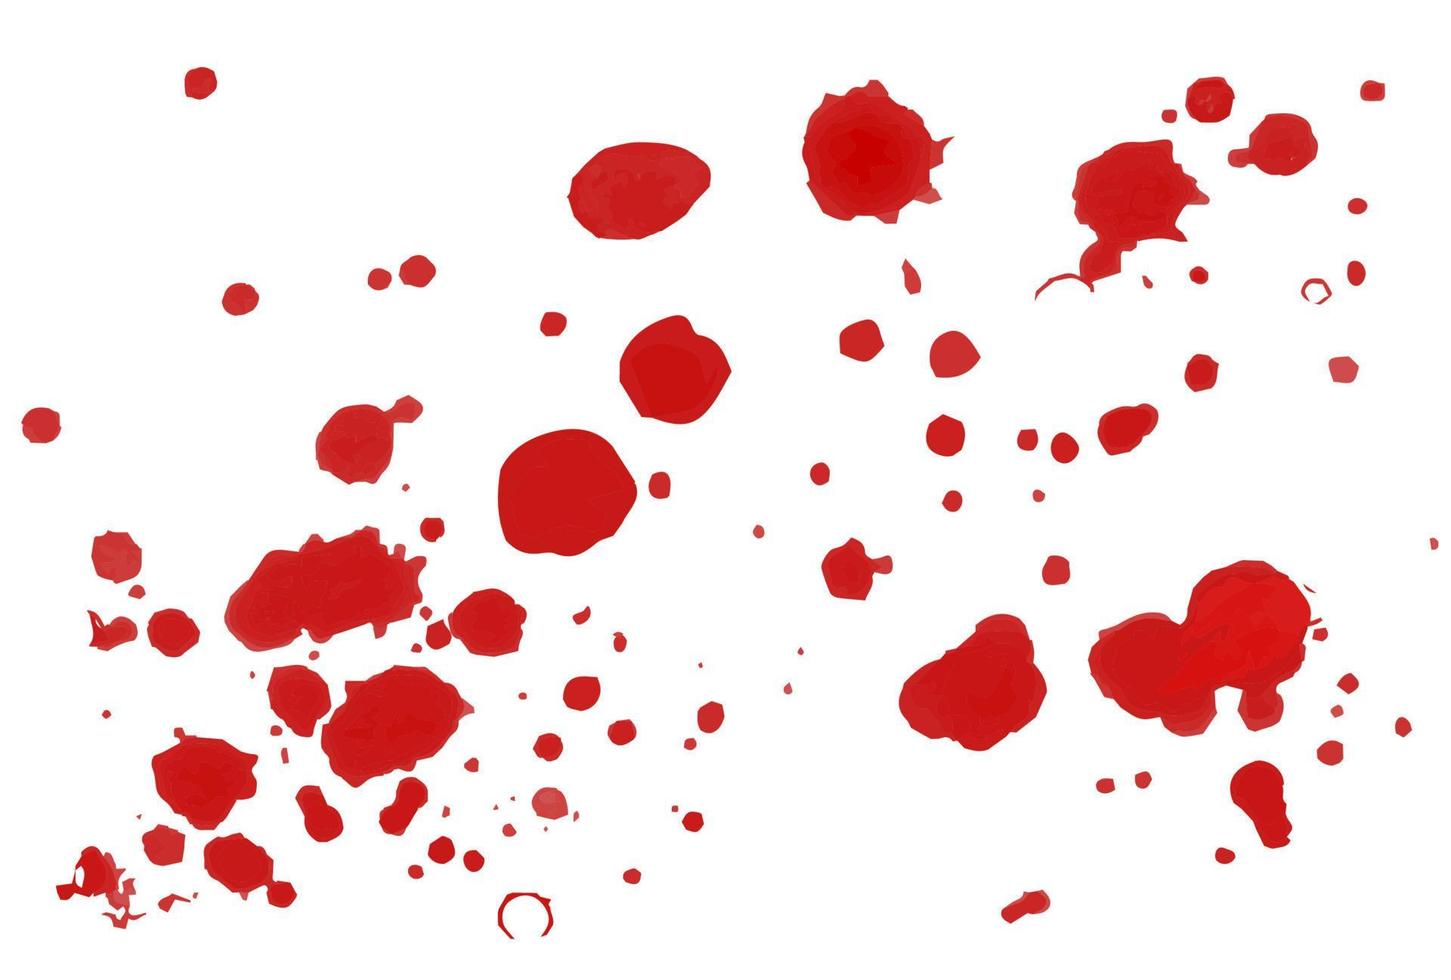 Ketchup stains and splashes, tomato sauce red splats and smears. vector